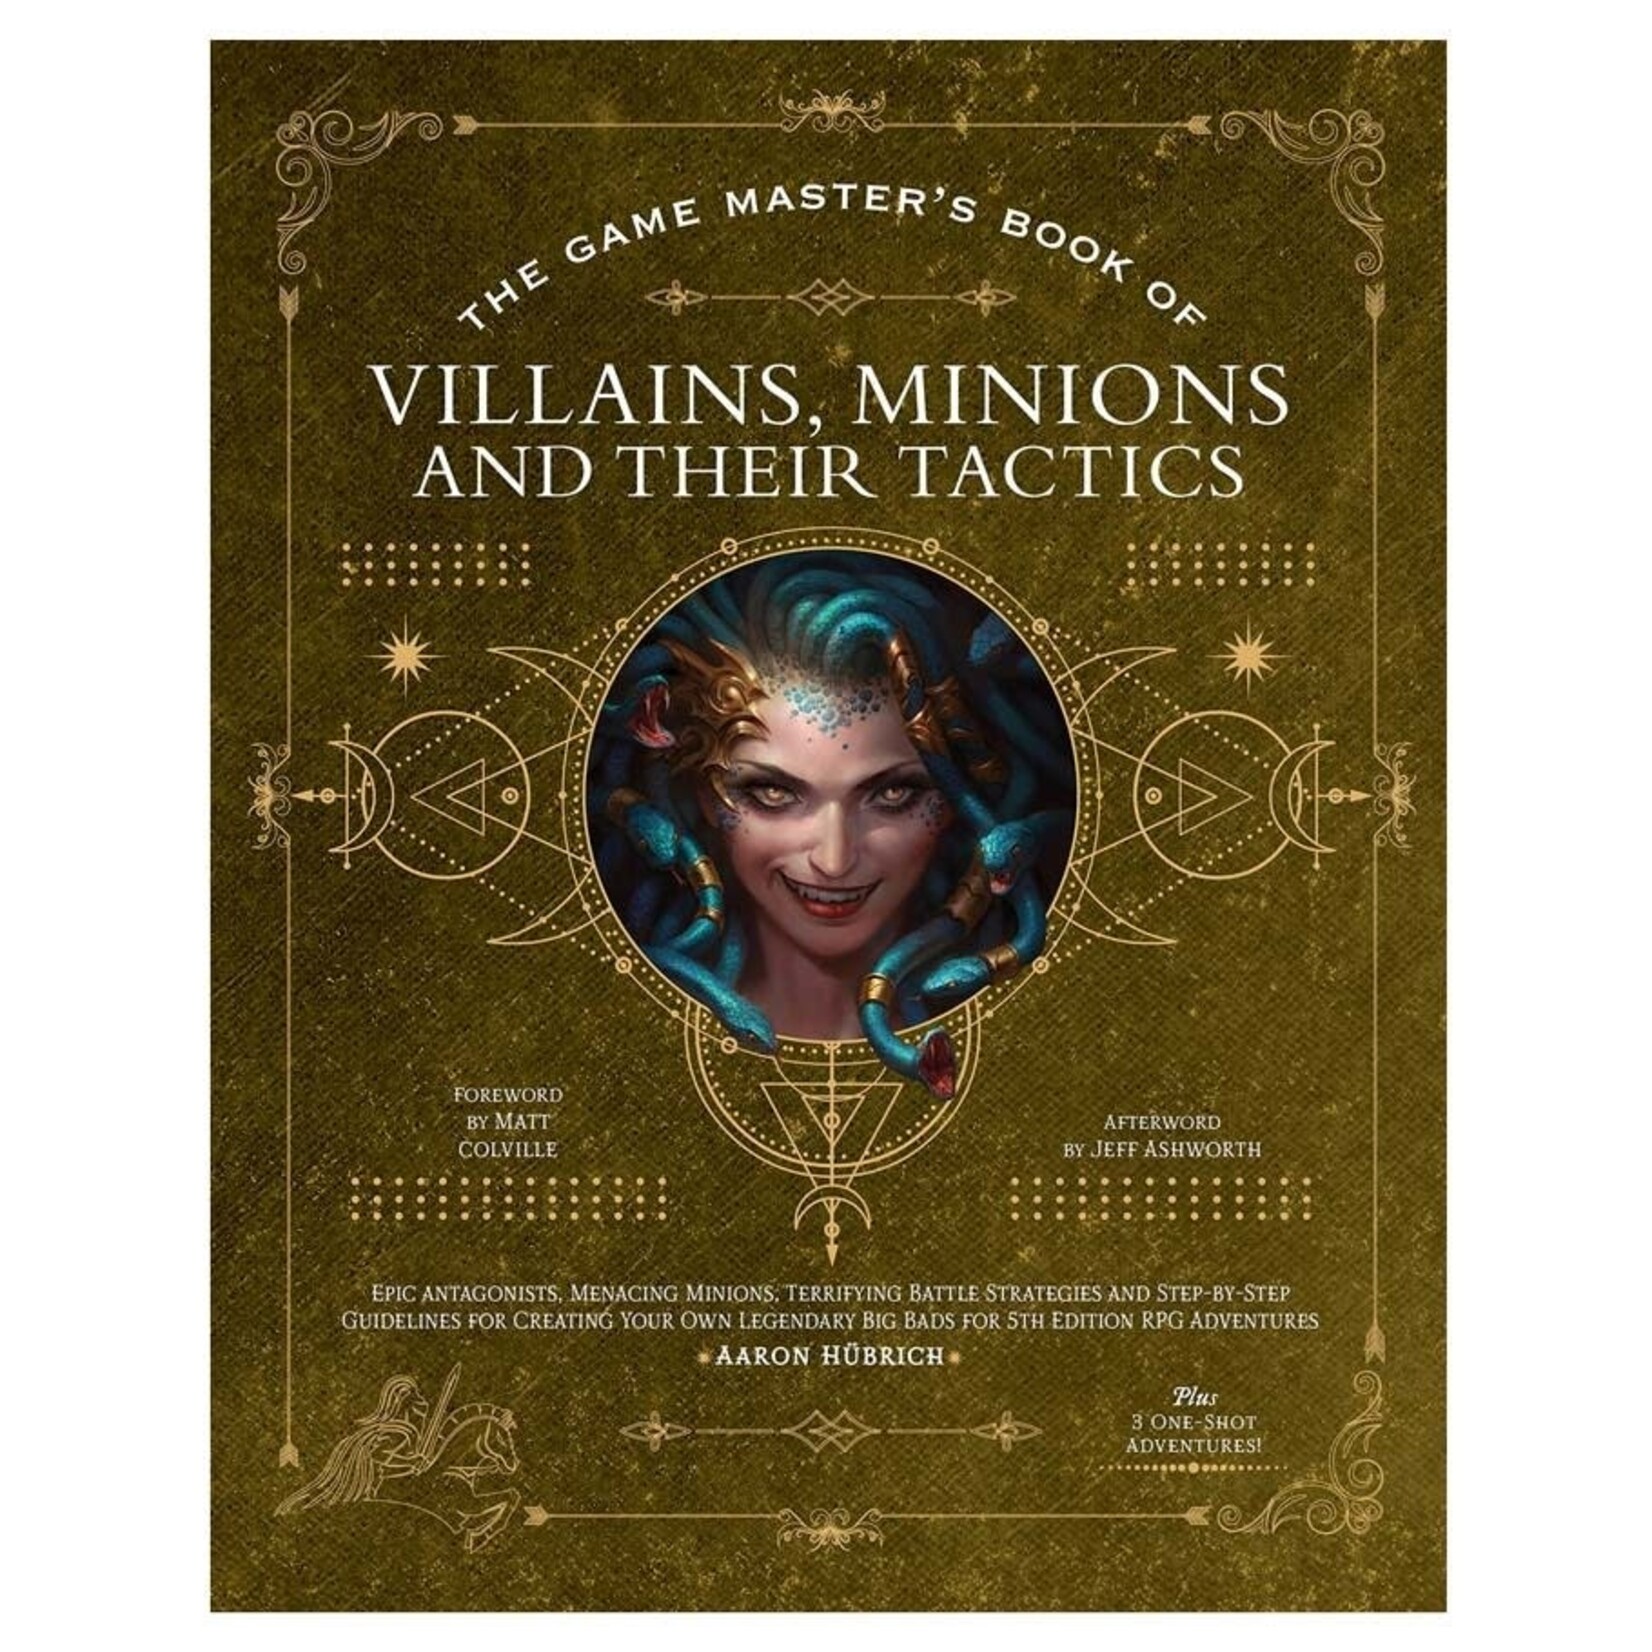 Media Lab The Game Master's Book of Villains, Minions and Their Tactics for D&D 5E